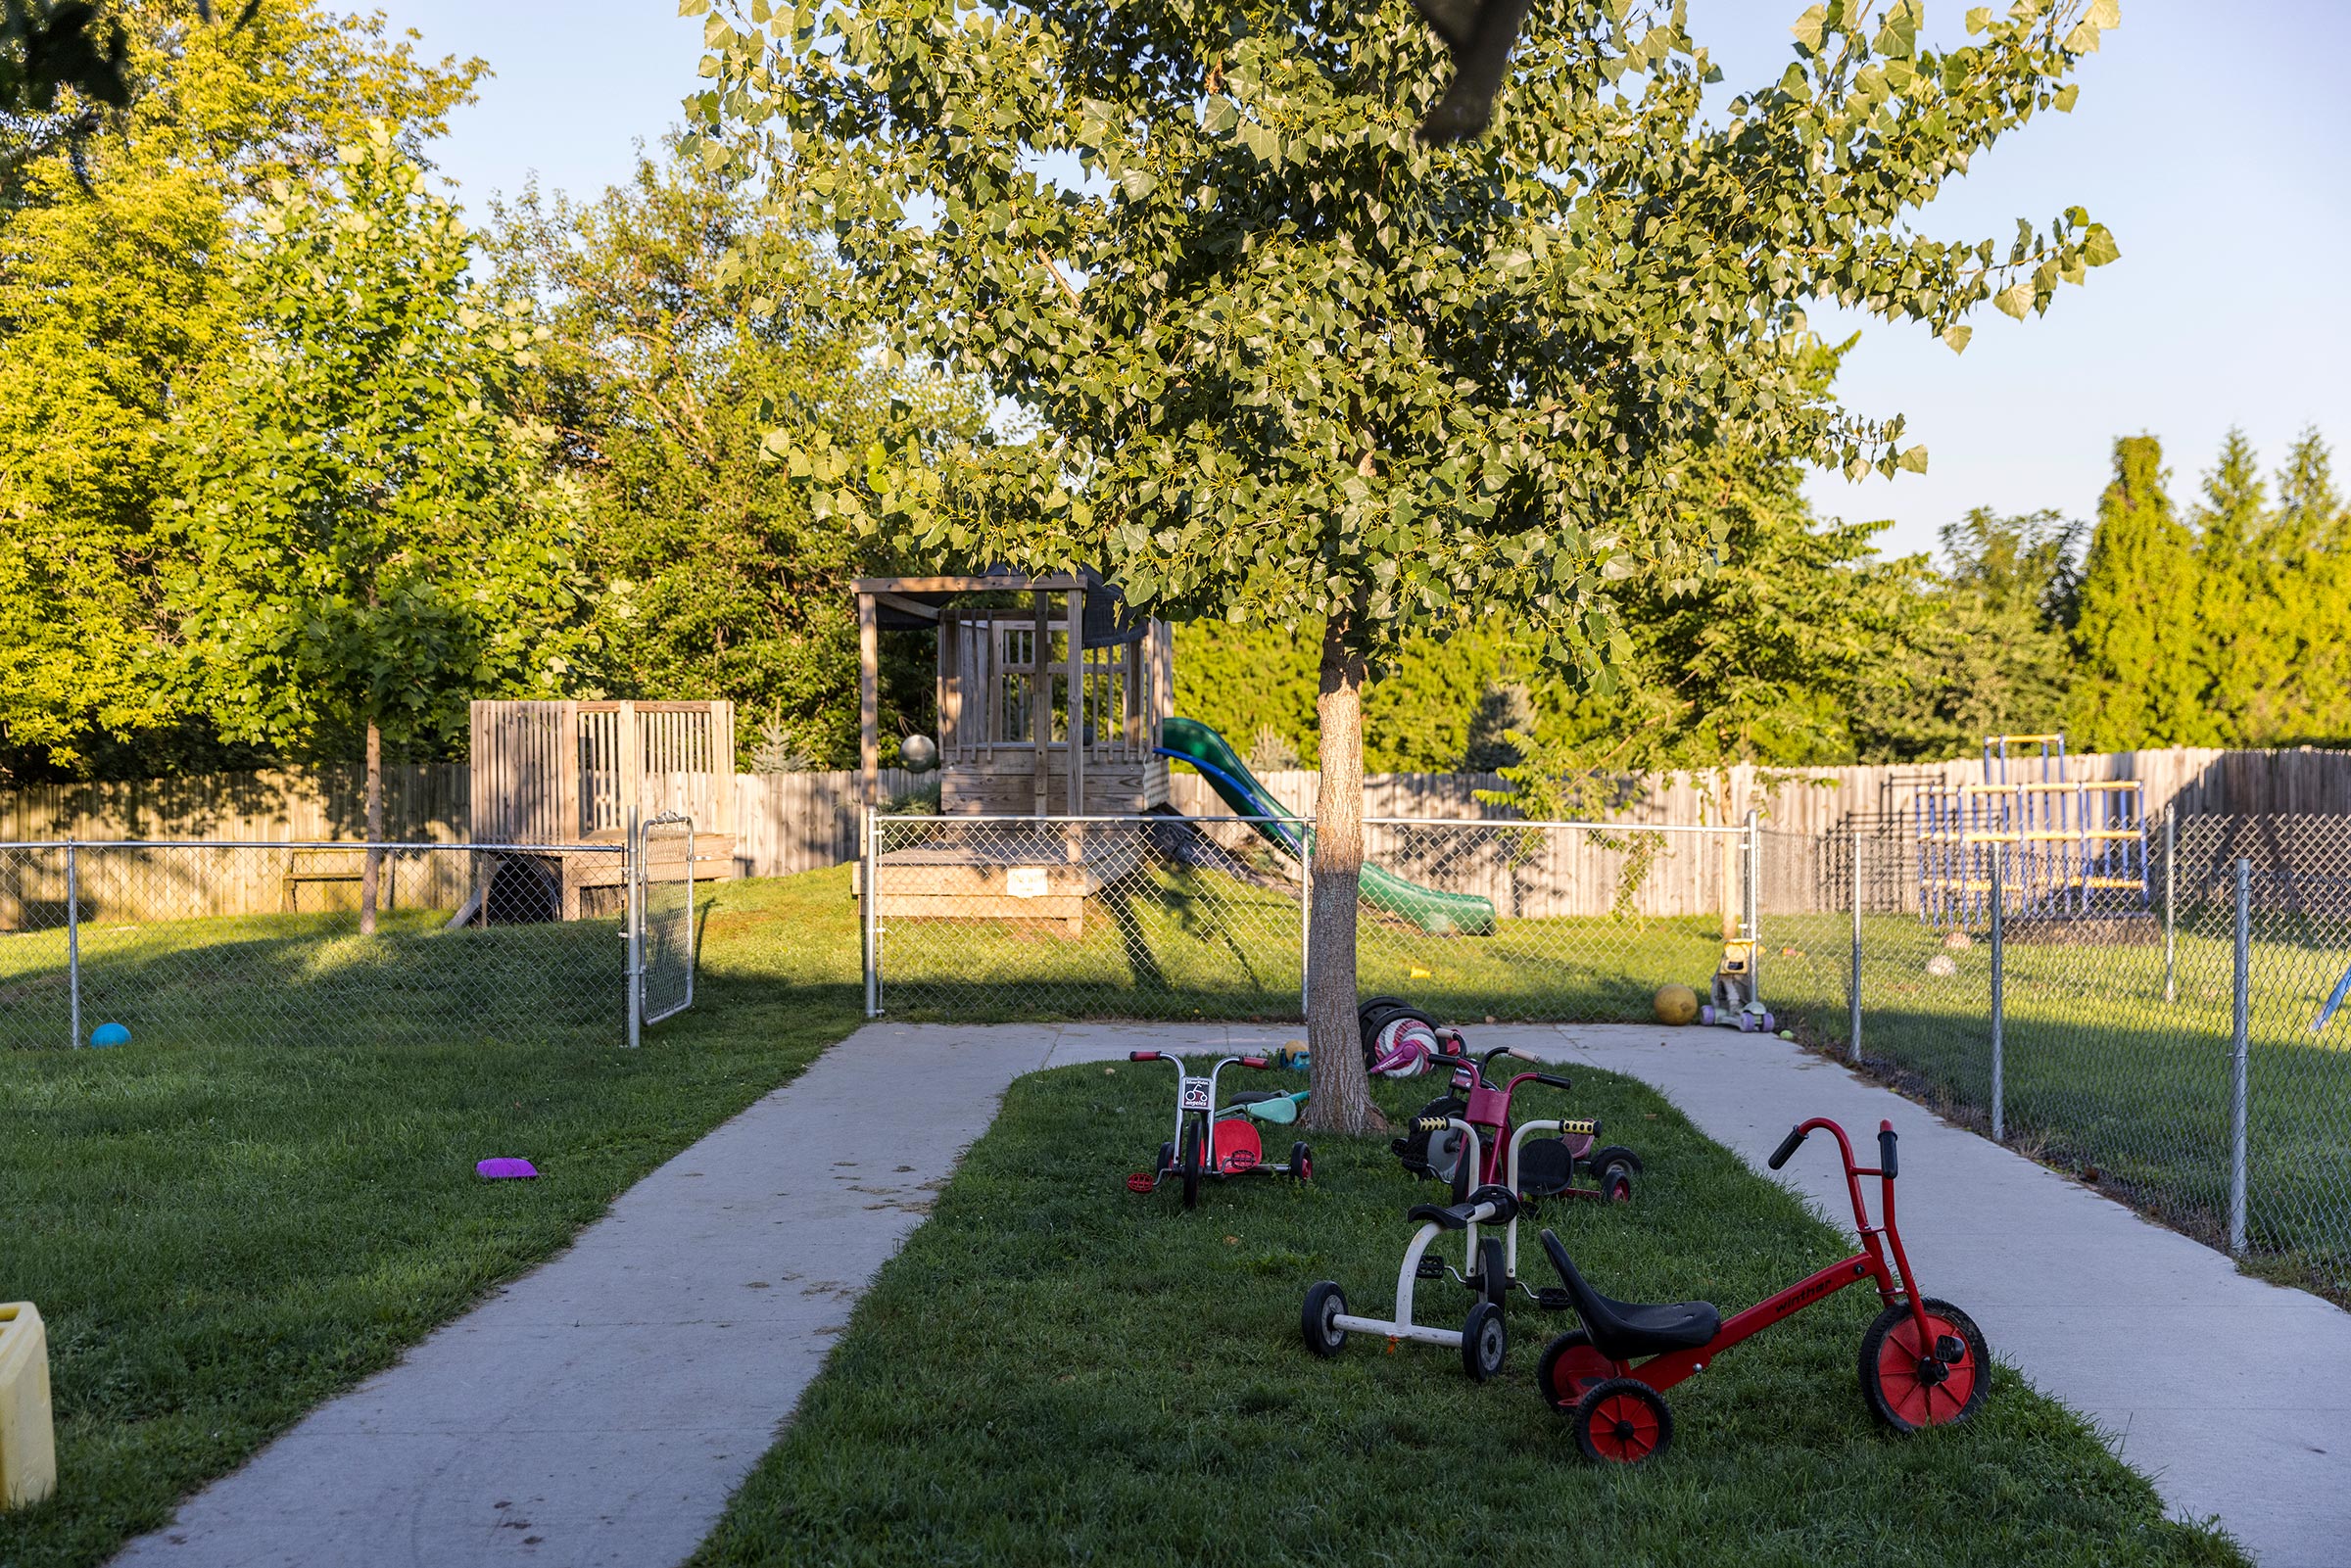 Tipton Adaptive's closure leaves just one state-licensed daycare center for children younger than preschool in Tipton. Across Iowa, 28% of childcare businesses closed from 2016 to 2021. (Kathryn Gamble for TIME)